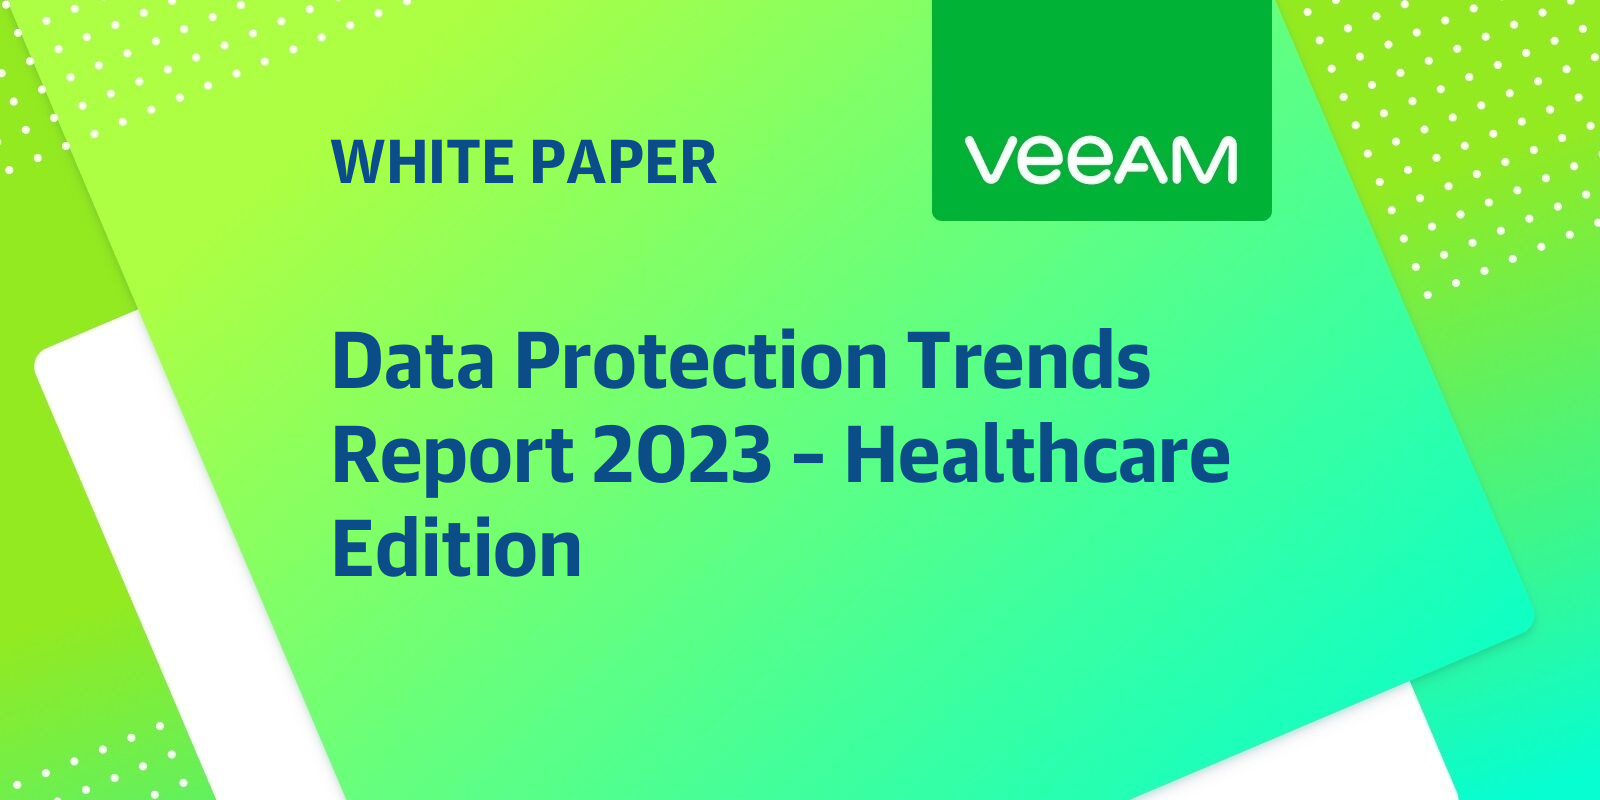 Data Protection Trends Report 2023 Healthcare Edition